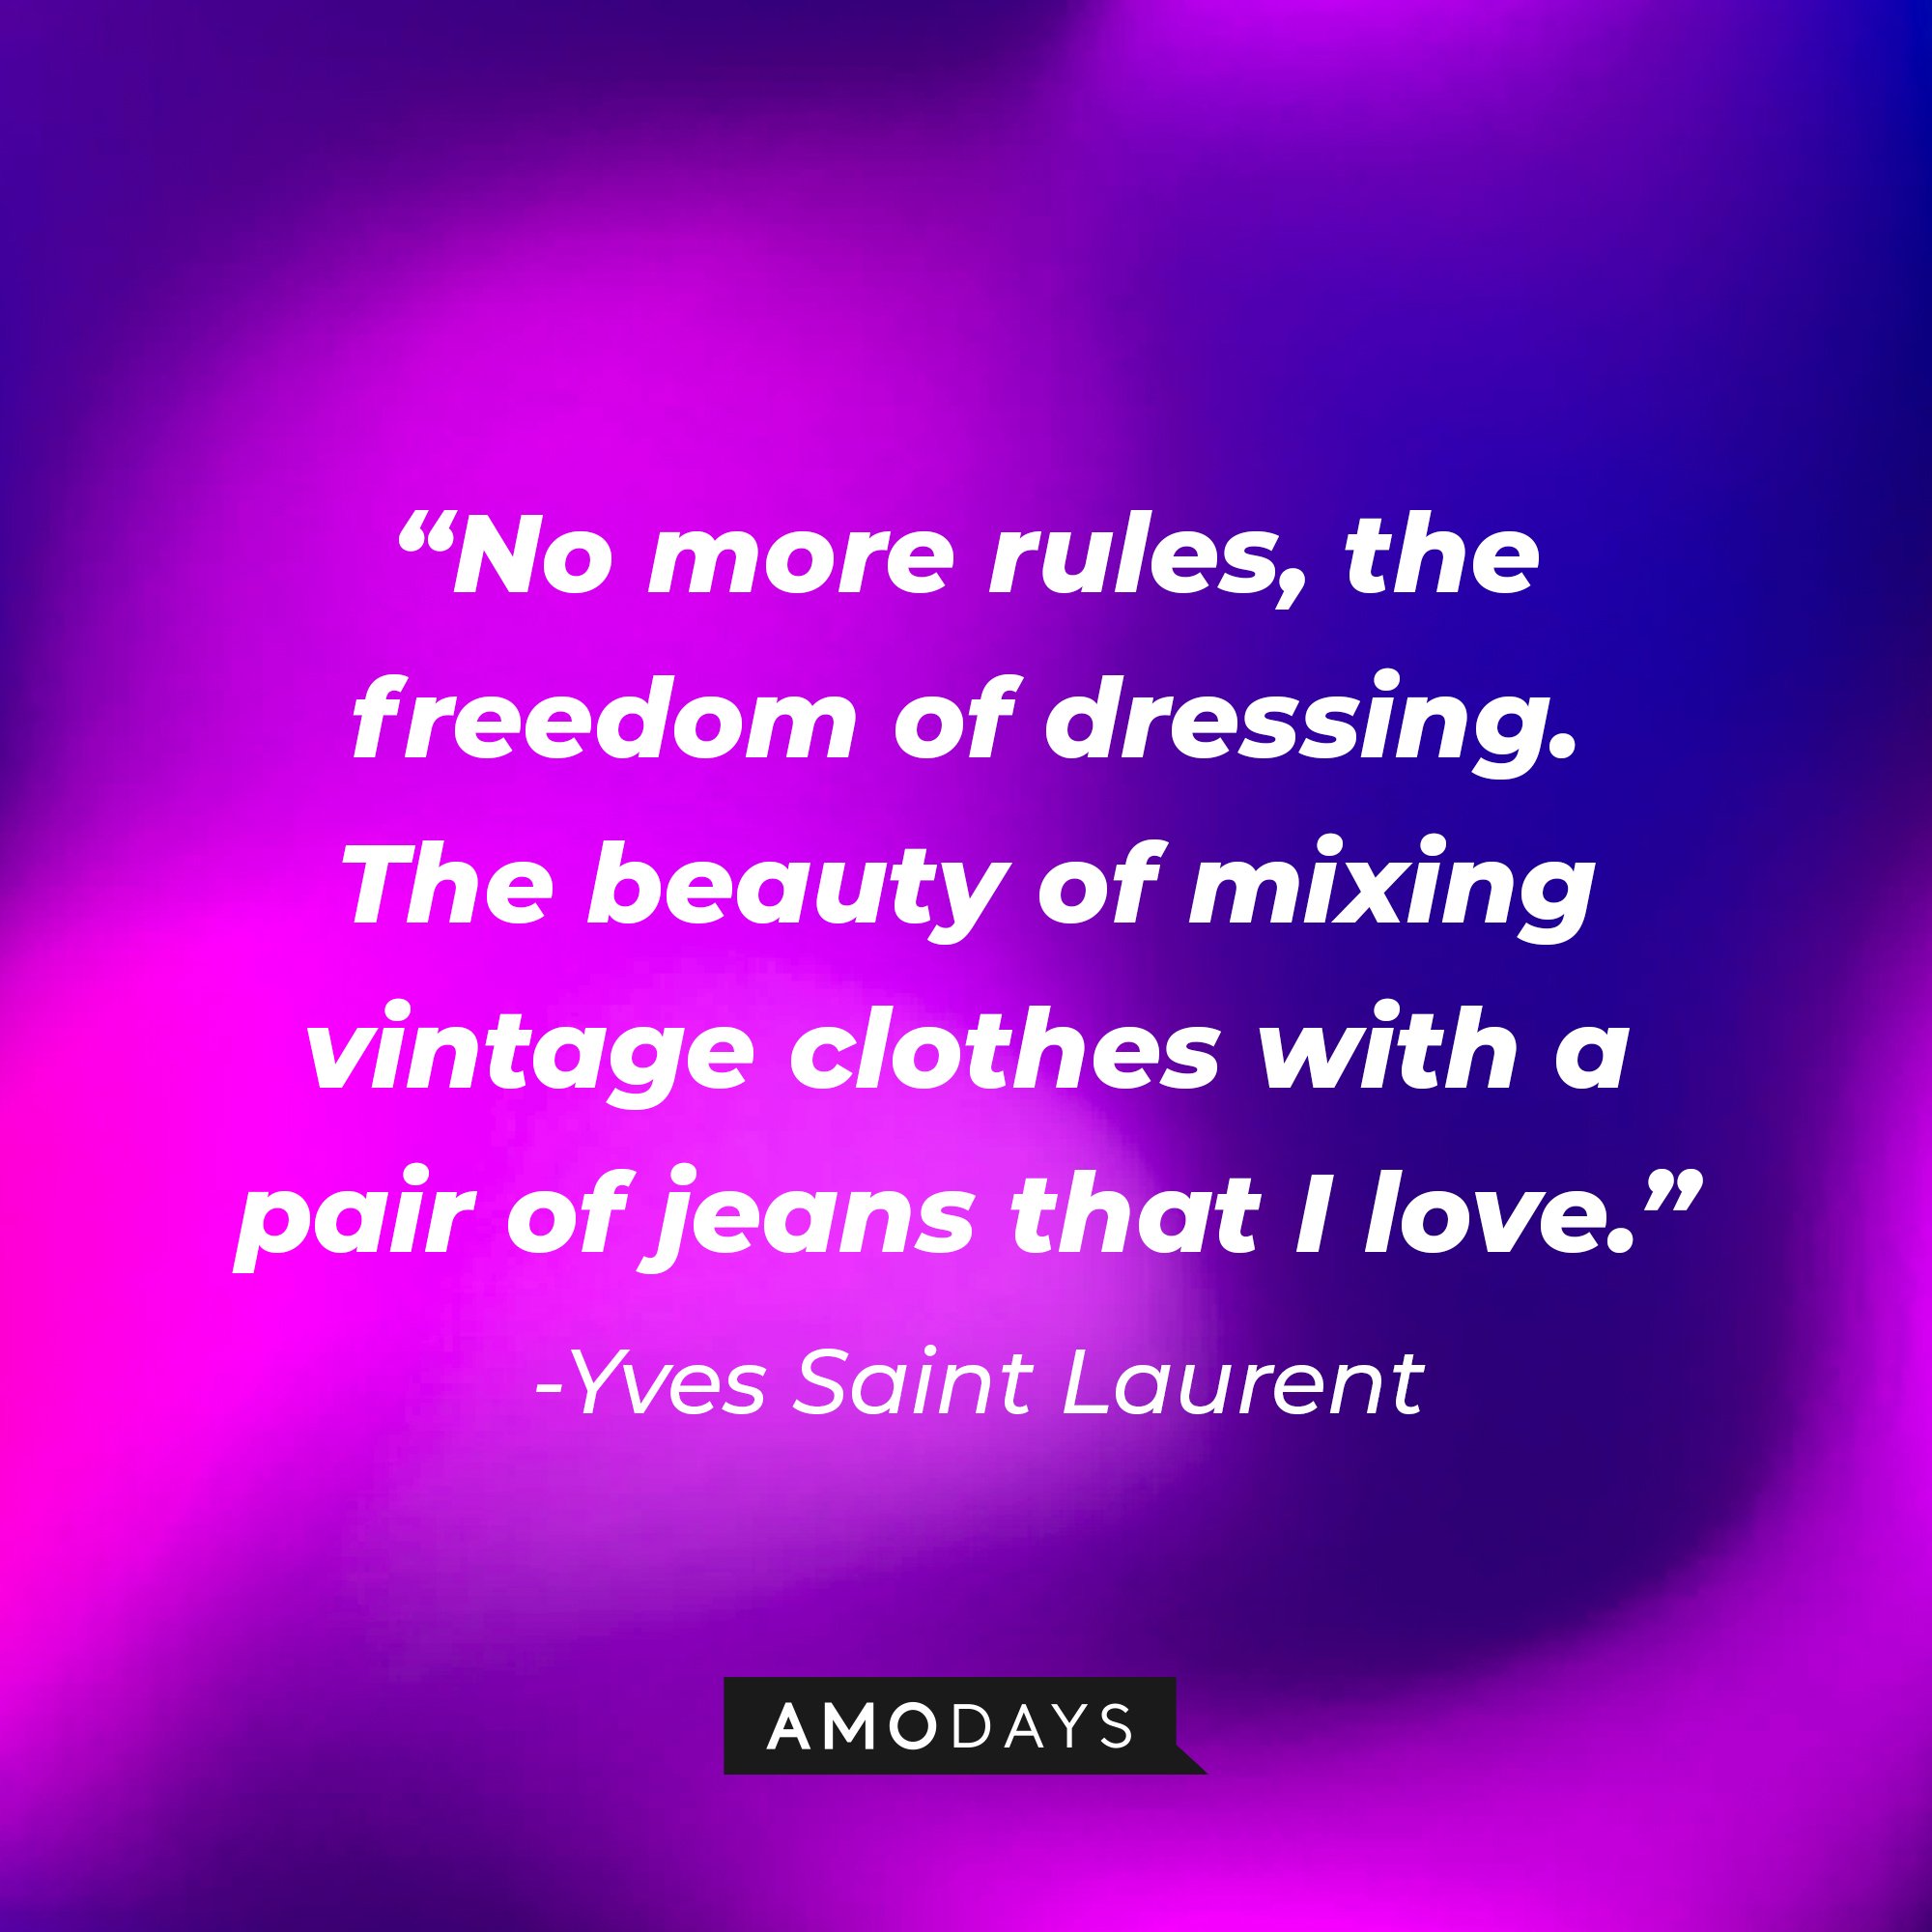 Yves Saint Laurent’s quote: "No more rules, the freedom of dressing. The beauty of mixing vintage clothes with a pair of jeans that I love." | Image: AmoDays